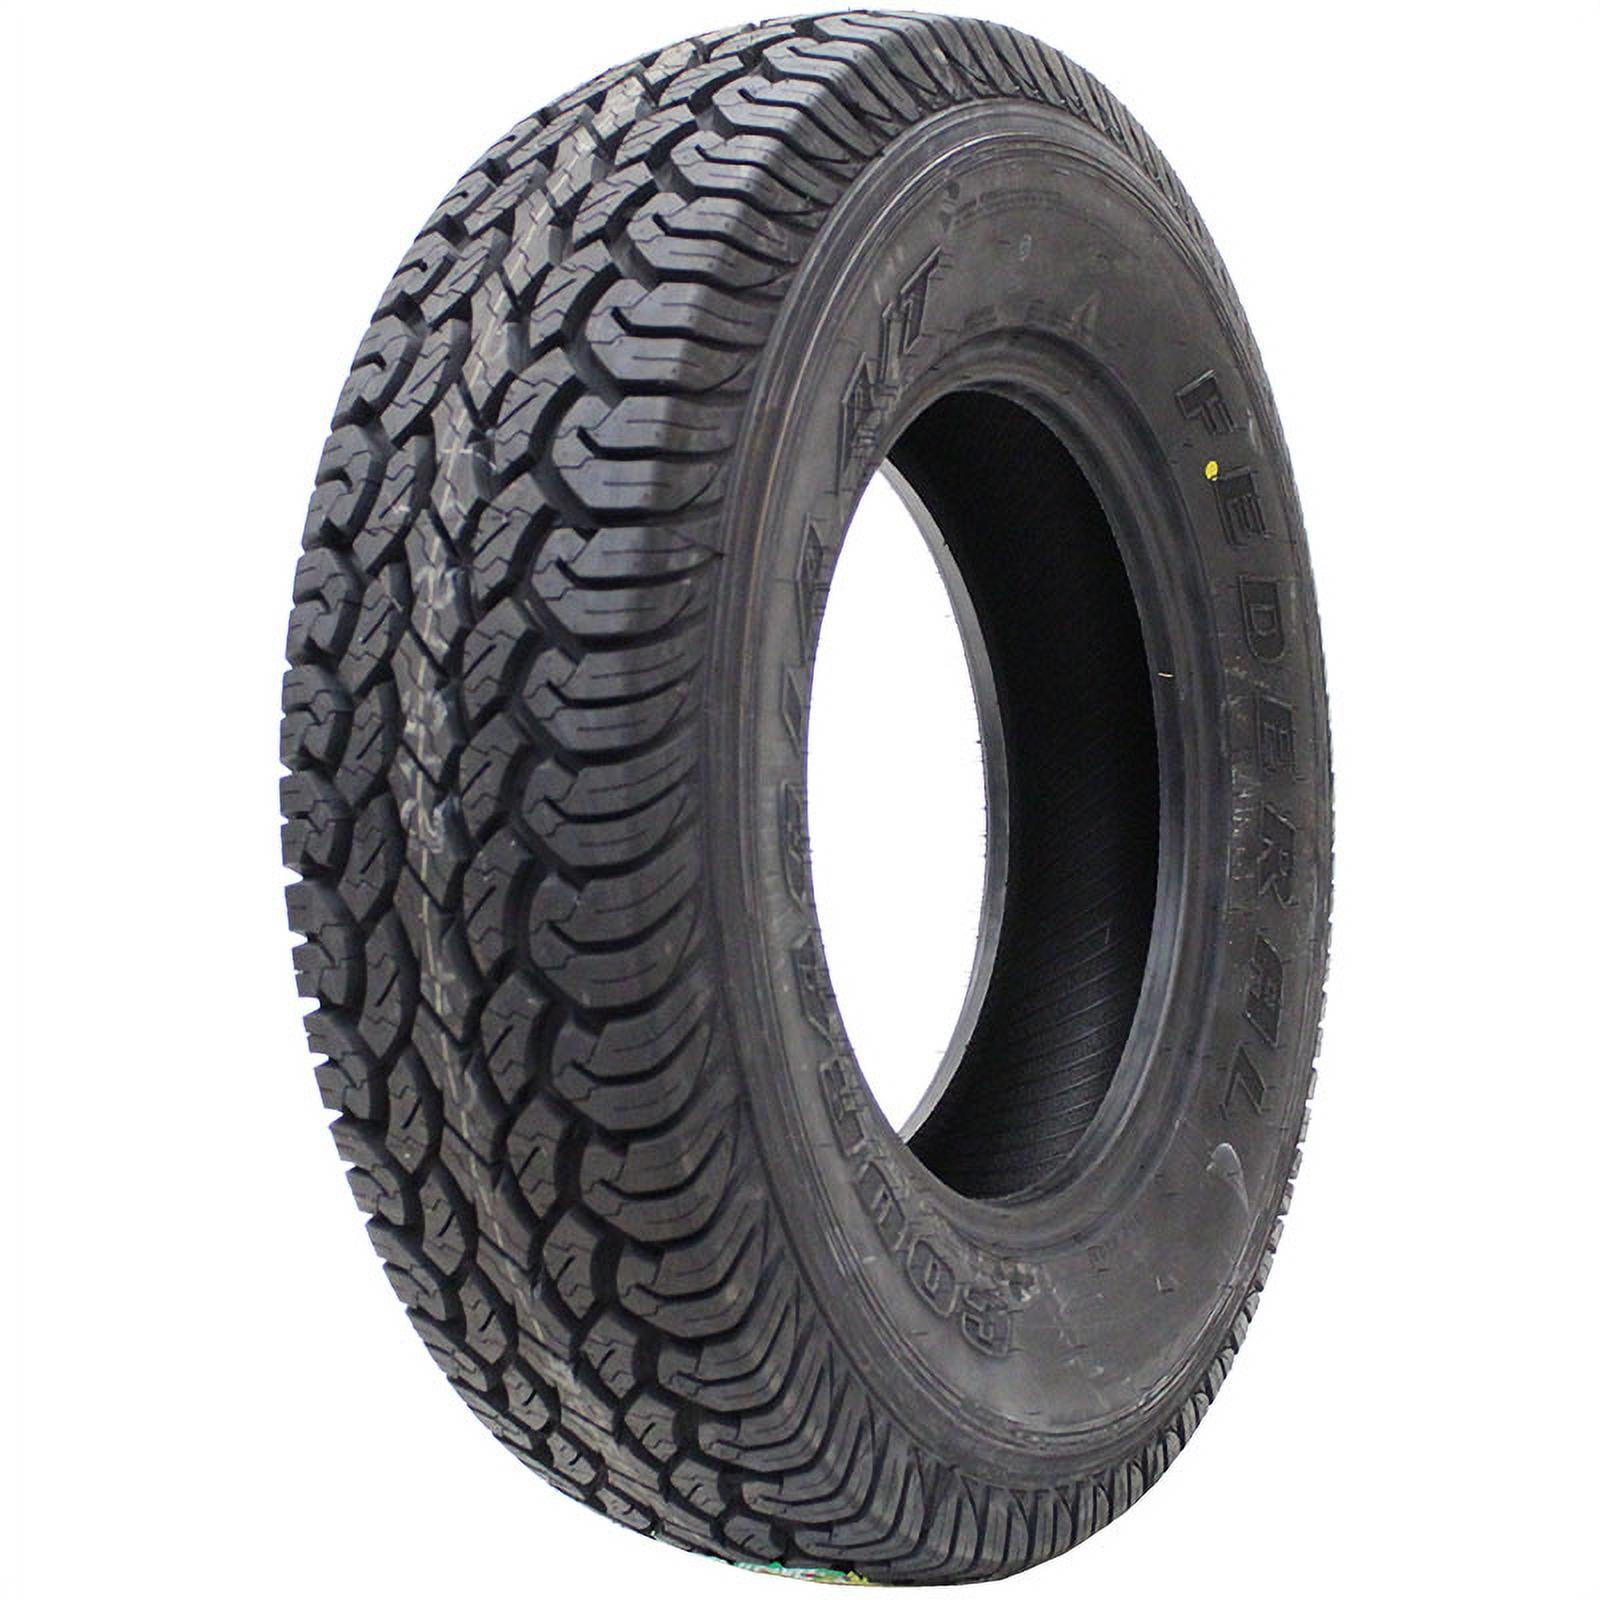 FEDERAL COURAGIA AT LT225/70R17 116/114Q 10 PLY 